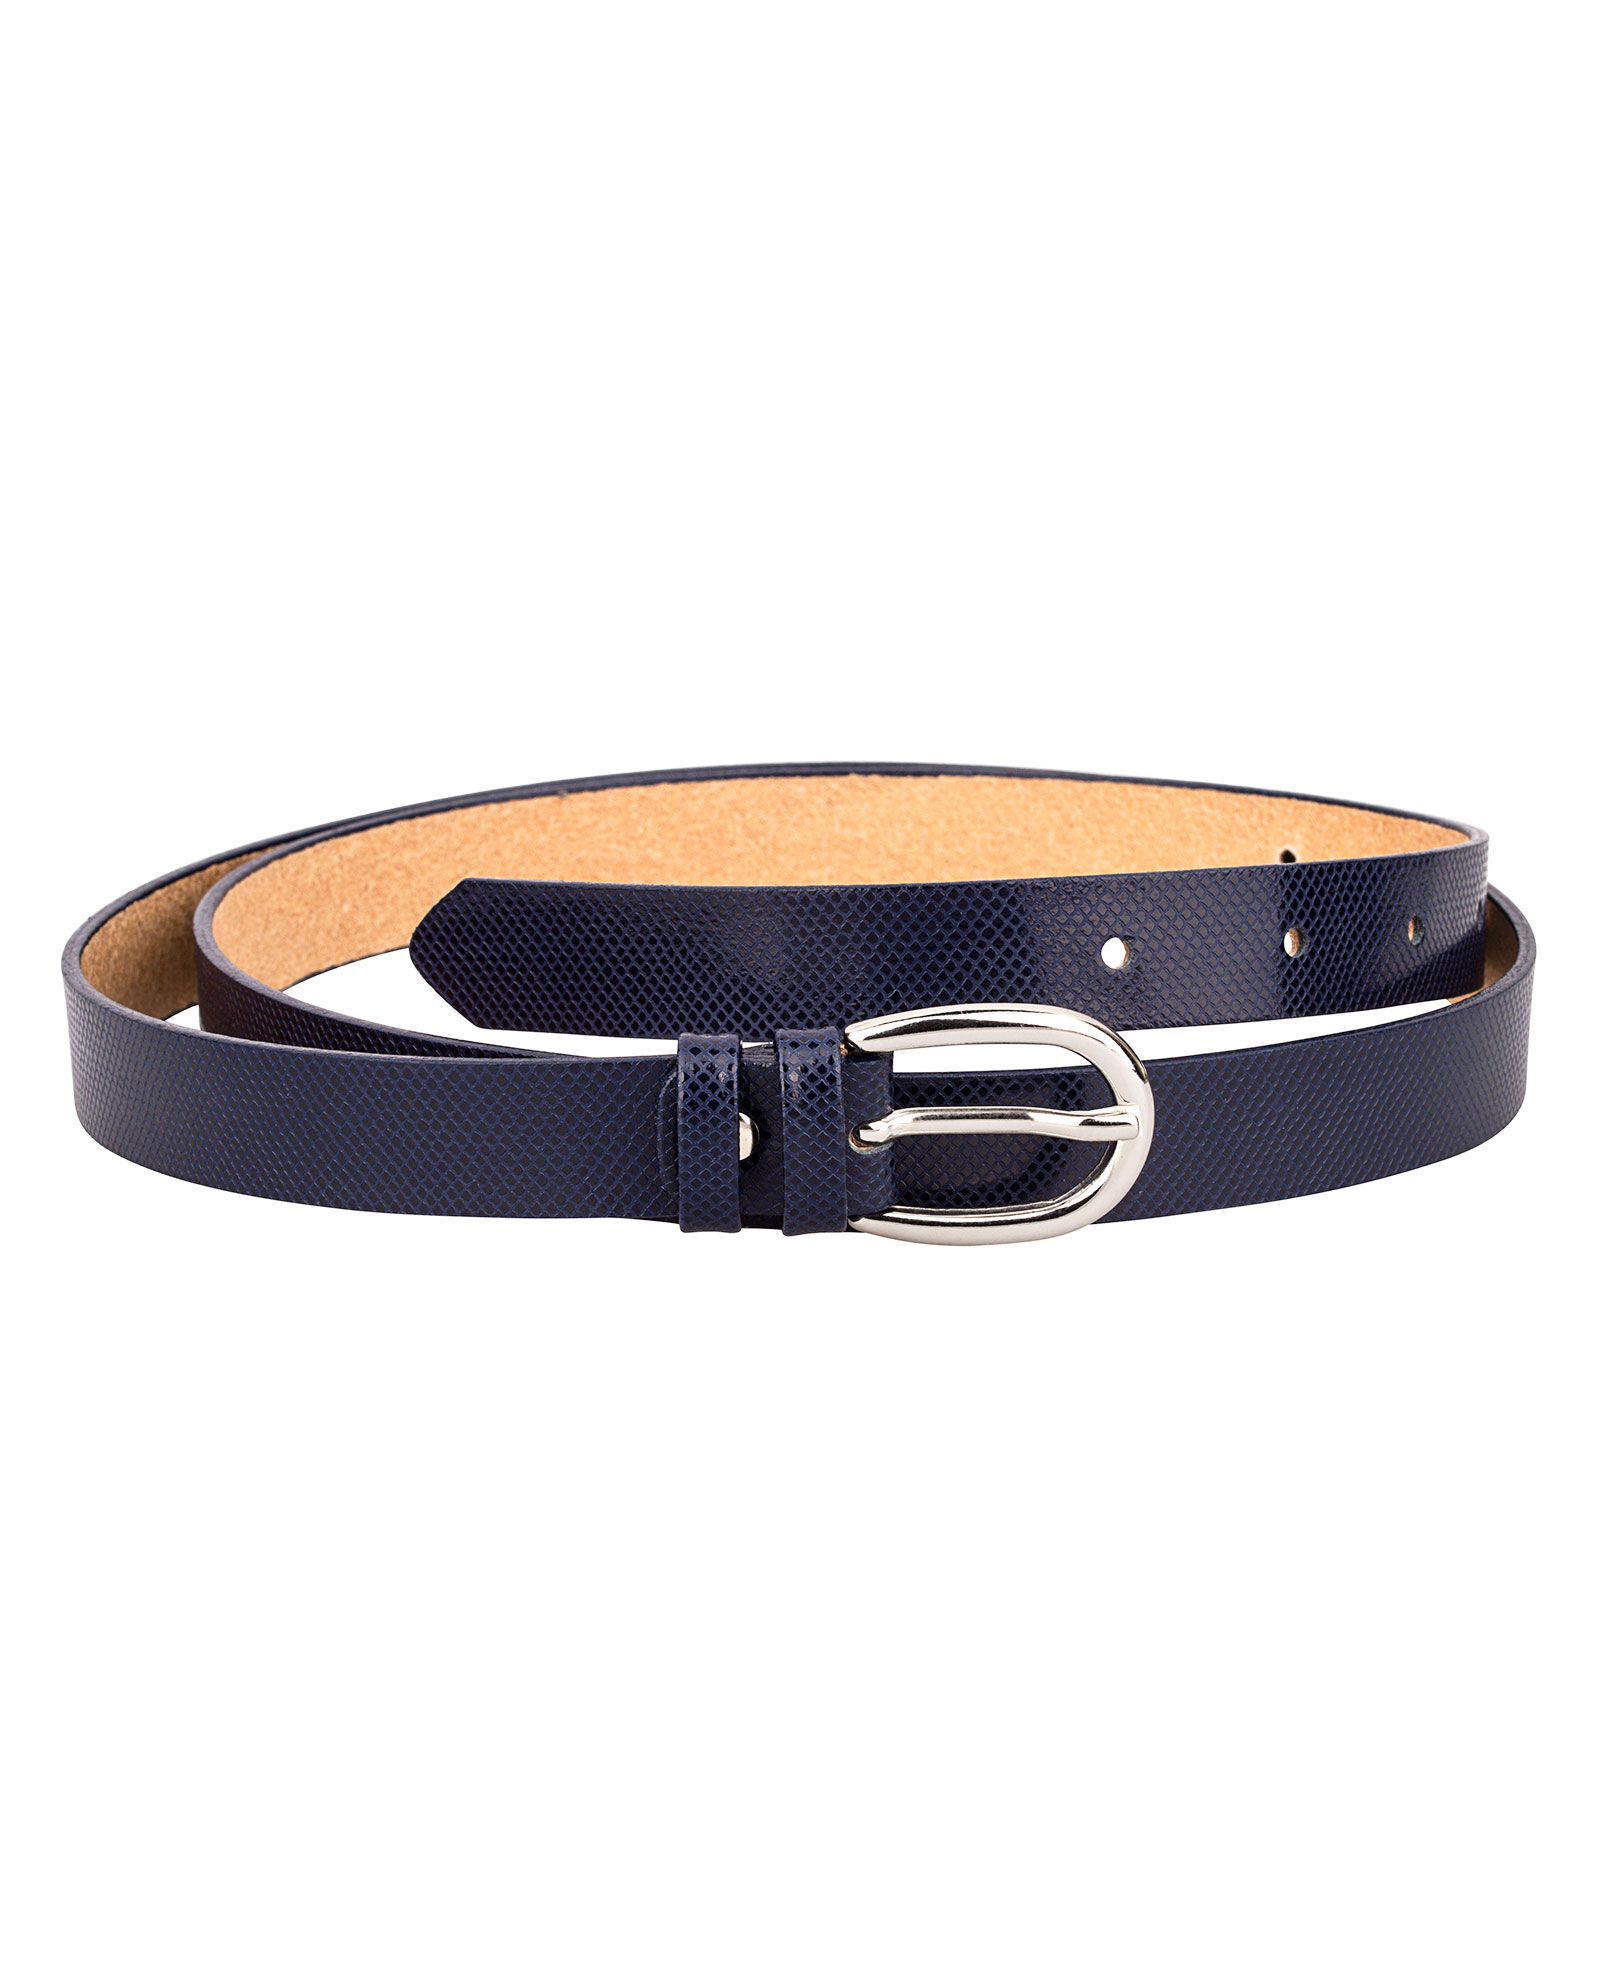 Buy Women's Blue Leather Belt for Dress - Thin Skinny - Free Shipping